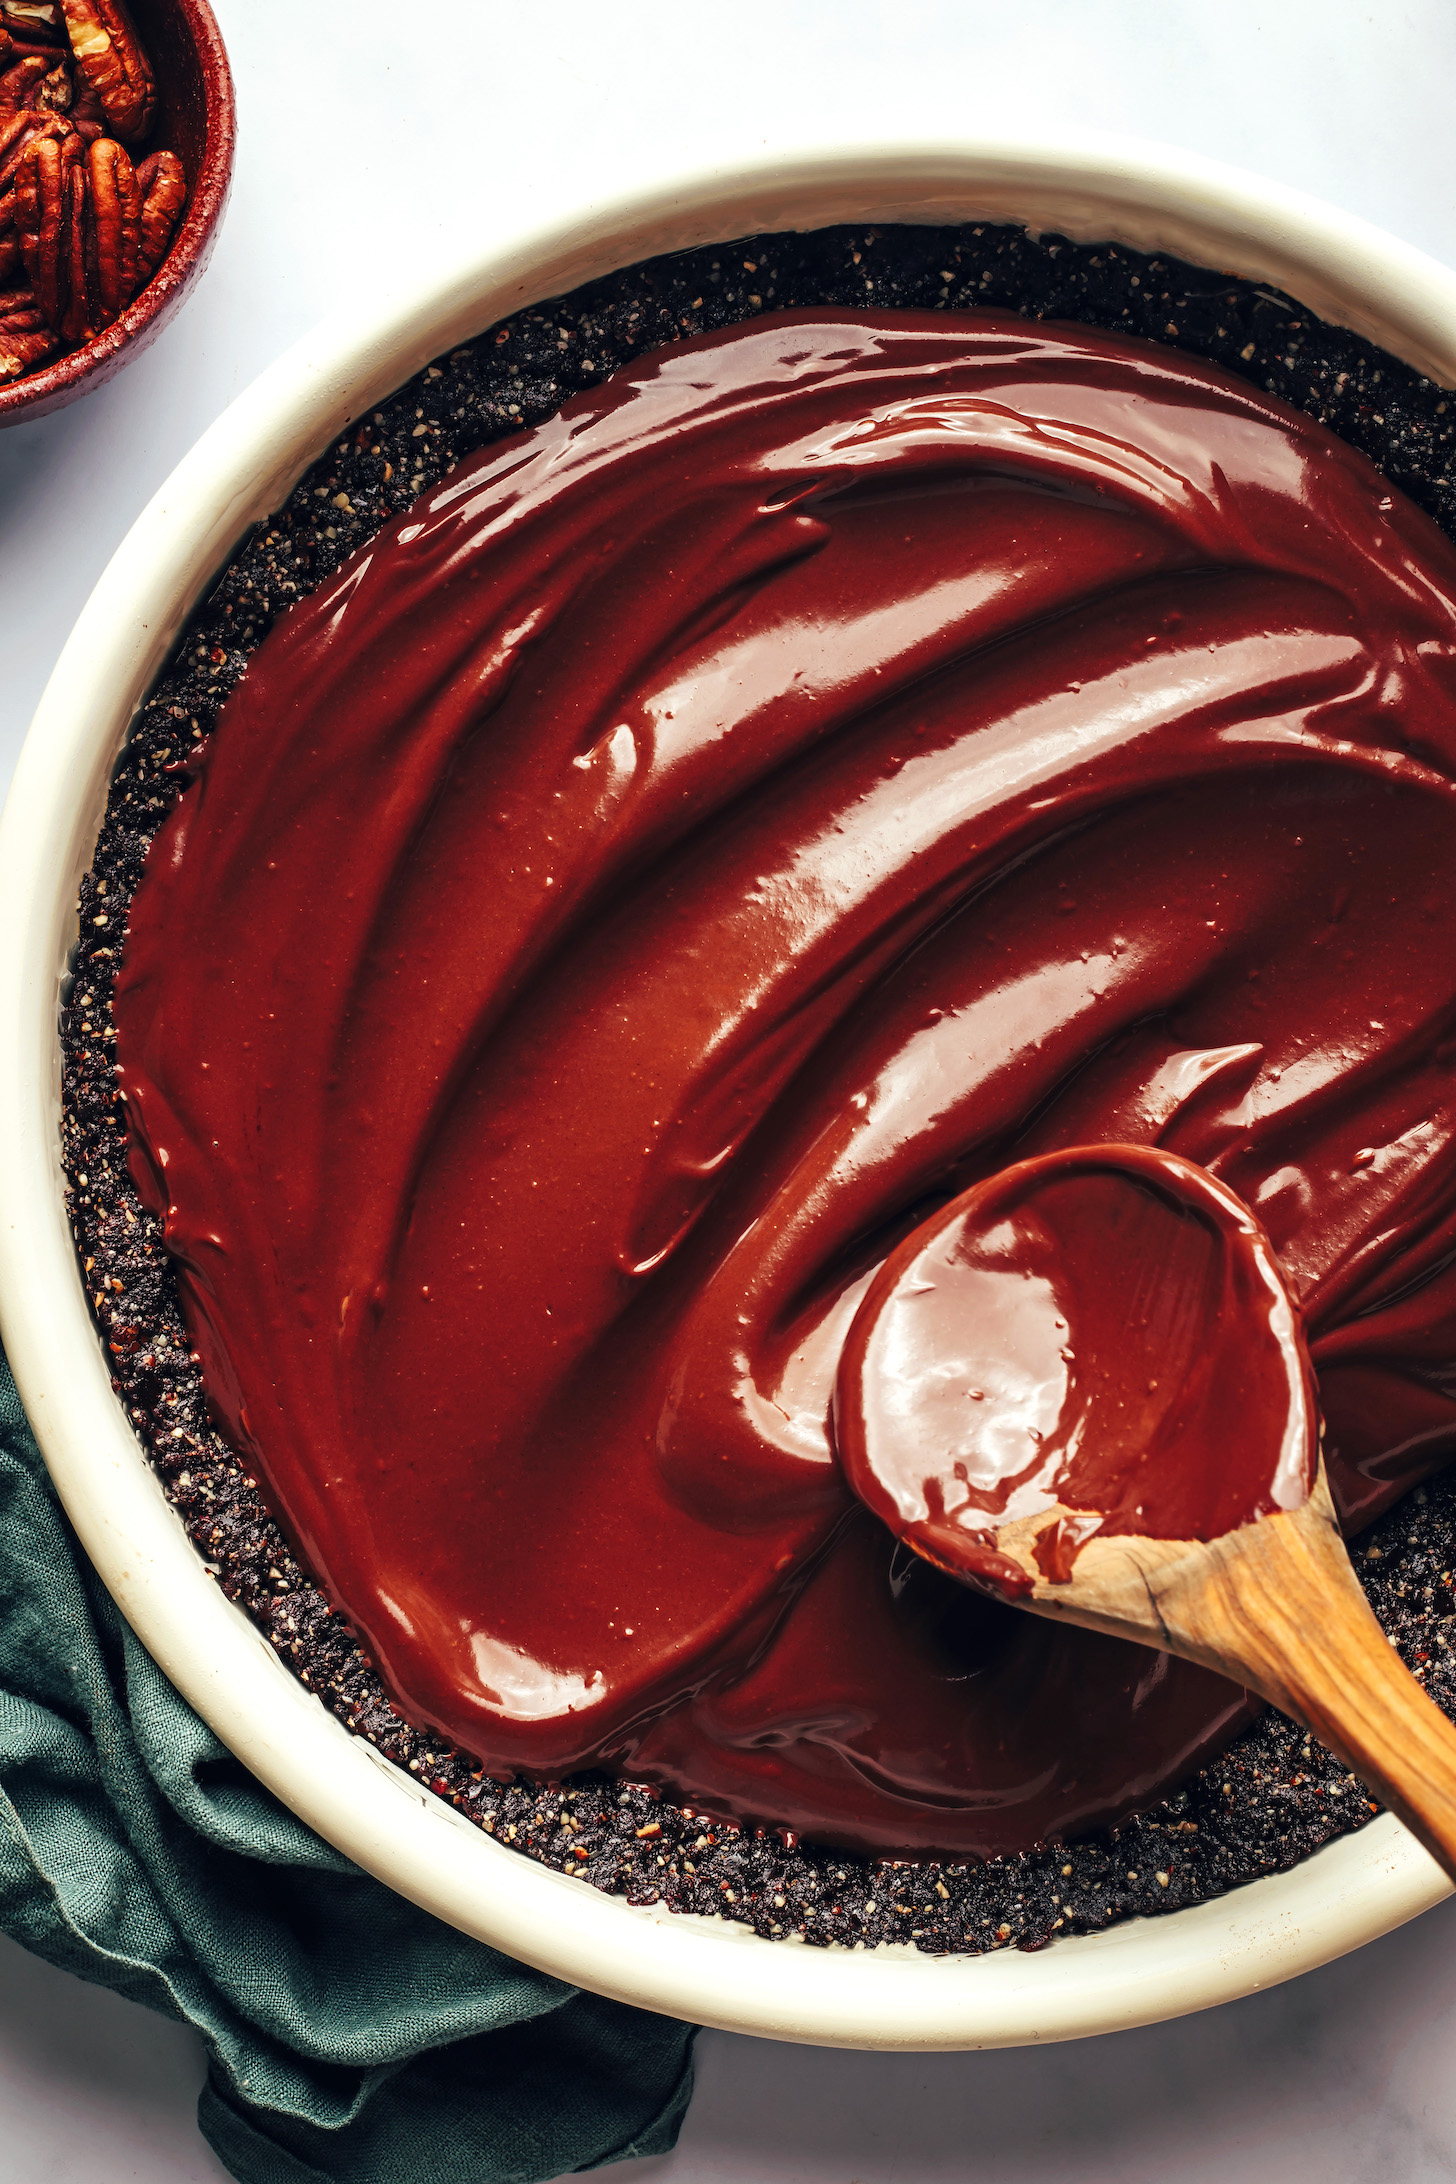 Spreading a thick ganache-like layer of chocolate filling into a pie crust